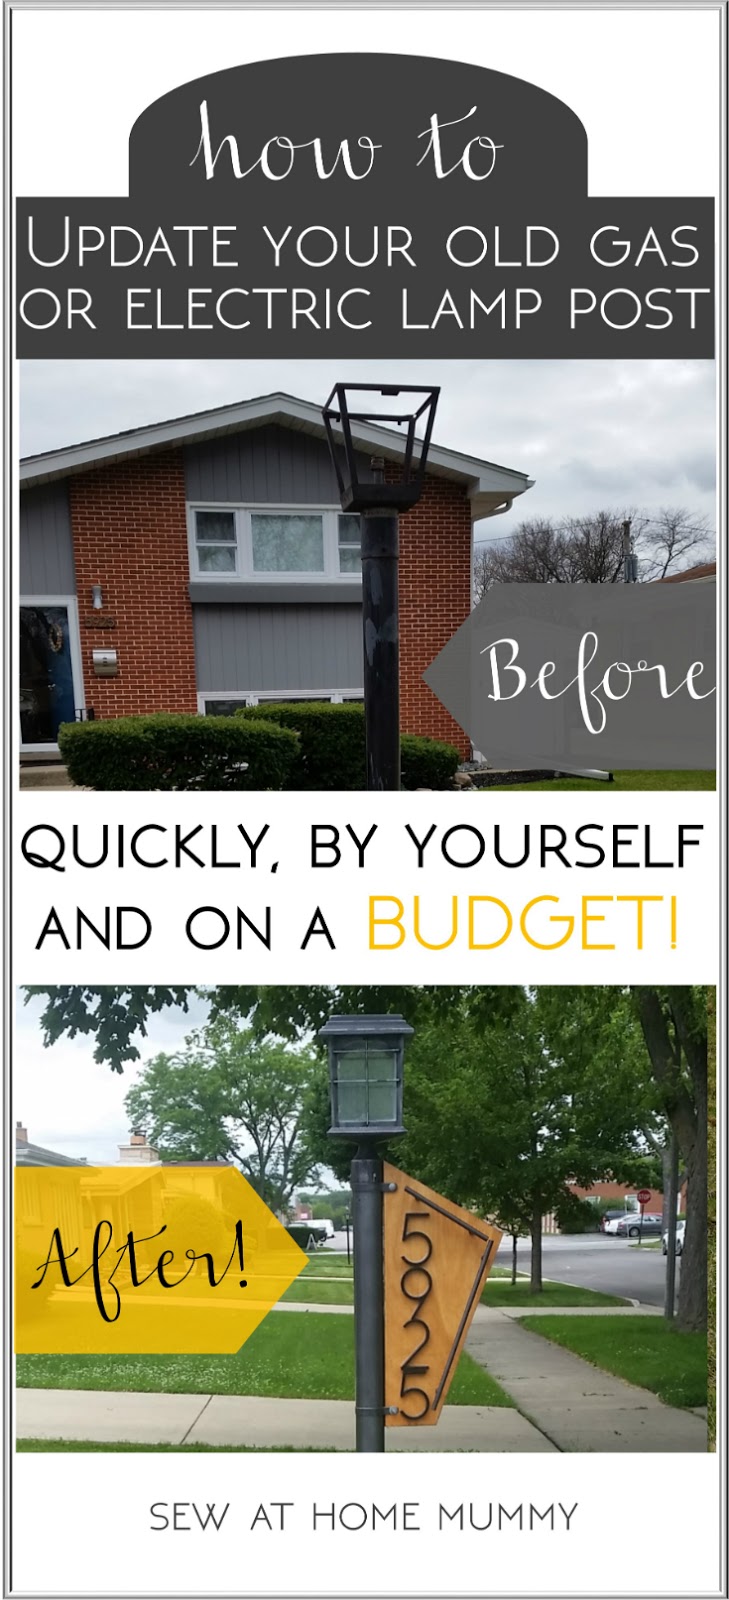 How to quickly and easily update your yard lamp post - by yourself! Easy solar conversion tutorial, step by step, including links to supplies and lighting ideas!